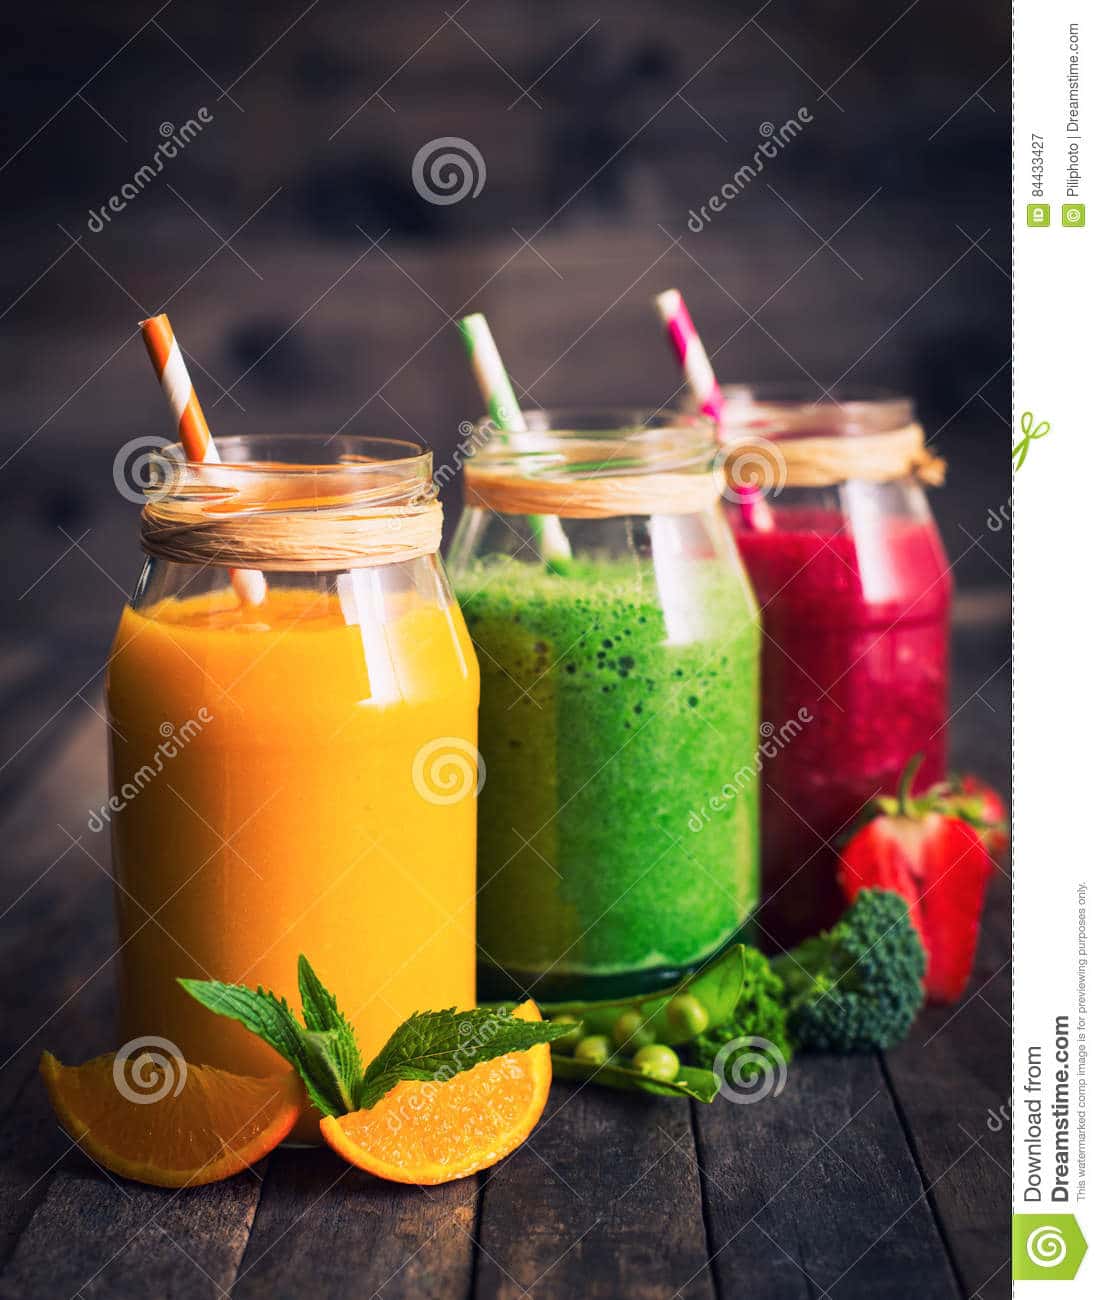 Healthy Fruit and Vegetable Smoothies Stock Image